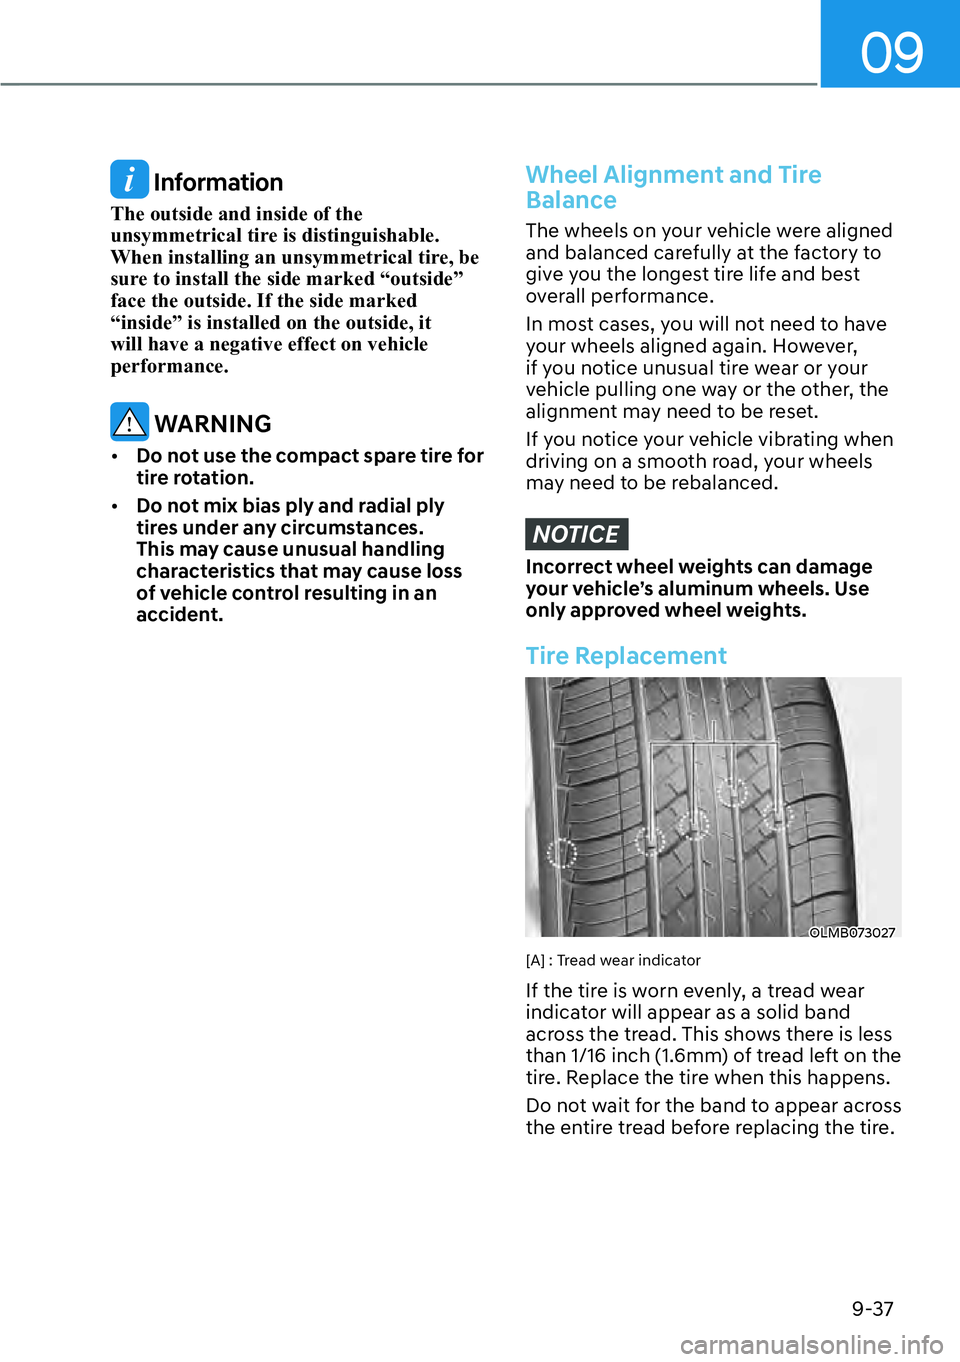 HYUNDAI KONA 2023  Owners Manual 09
9-37
 Information
The outside and inside of the 
unsymmetrical tire is distinguishable. 
When installing an unsymmetrical tire, be 
sure to install the side marked “outside” 
face the outside. 